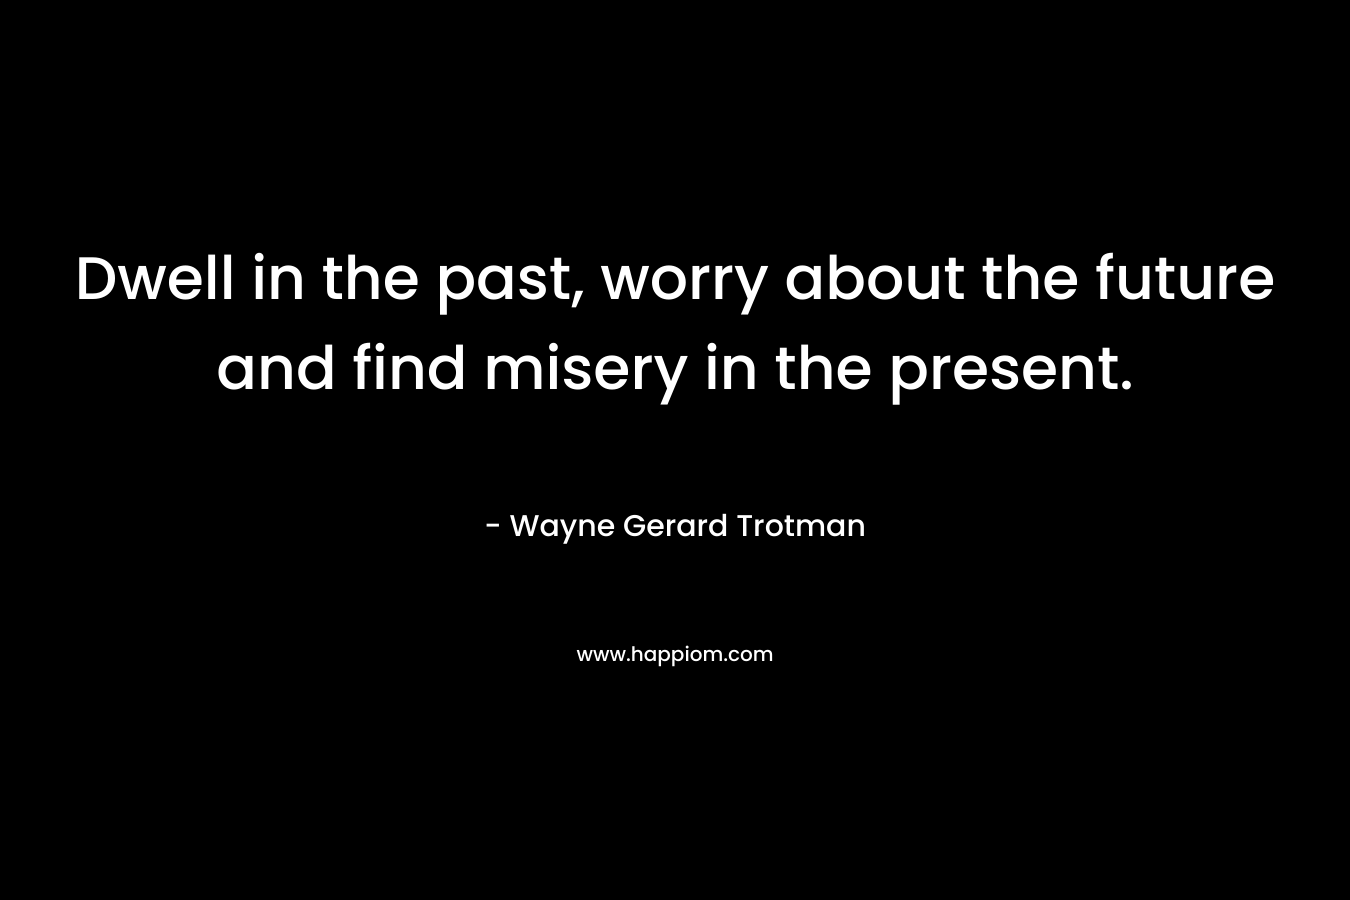 Dwell in the past, worry about the future and find misery in the present.